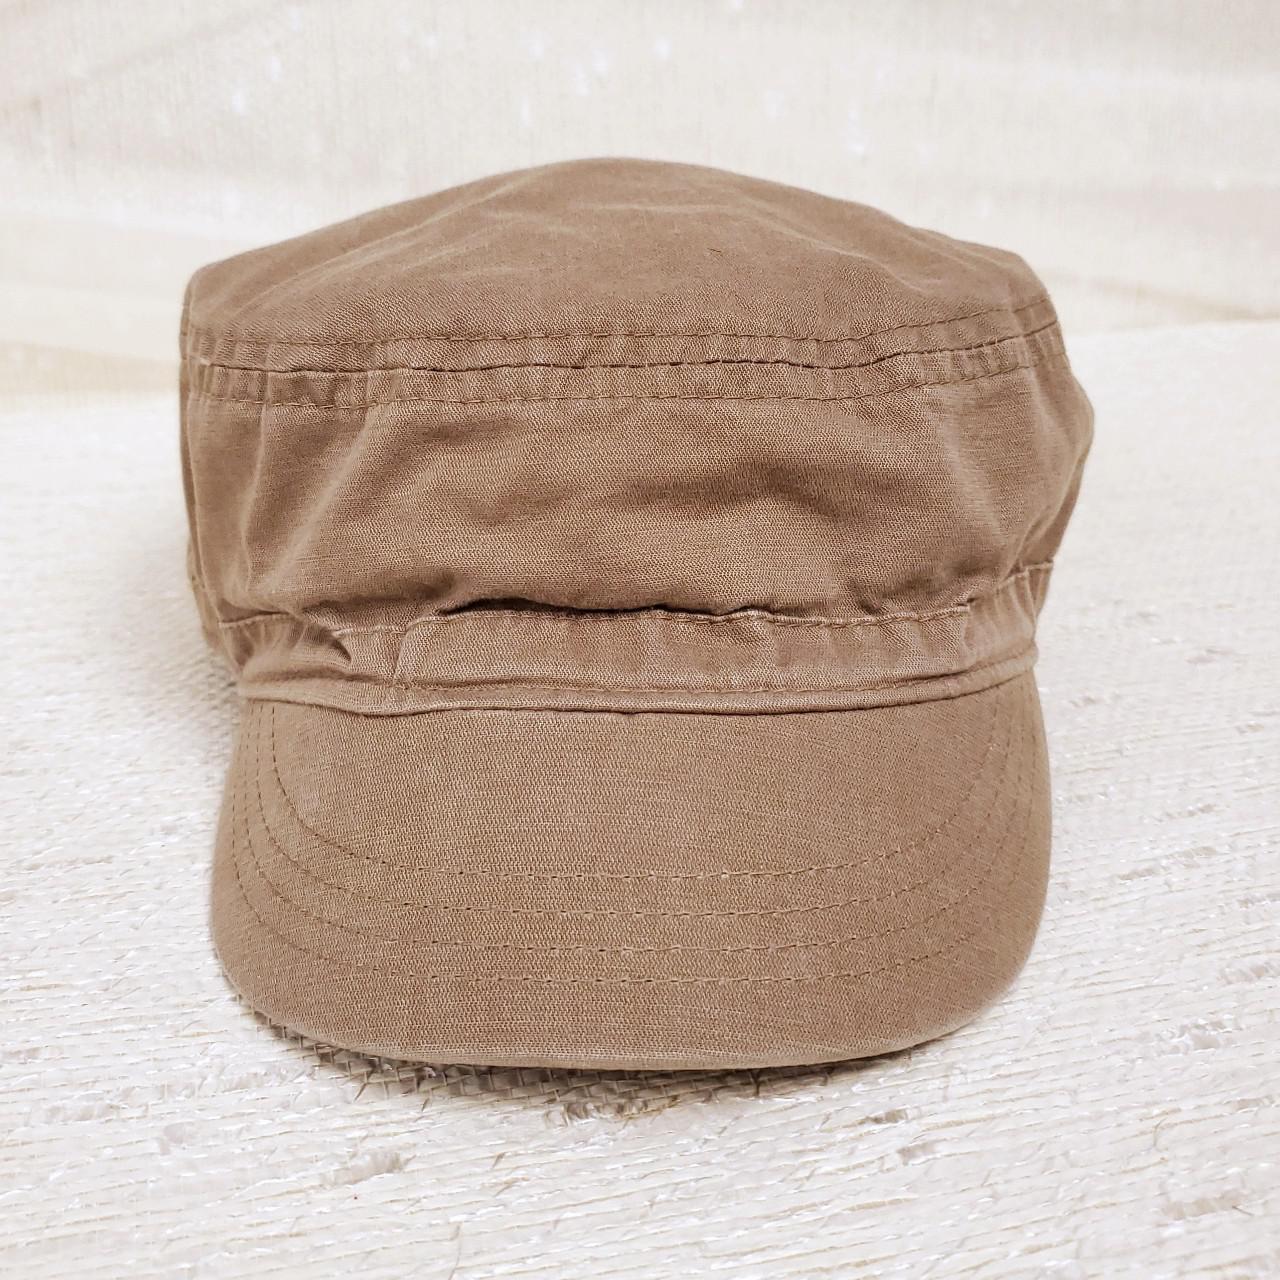 Product Image 2 - Y2k brown newsboy hat

Fabric is